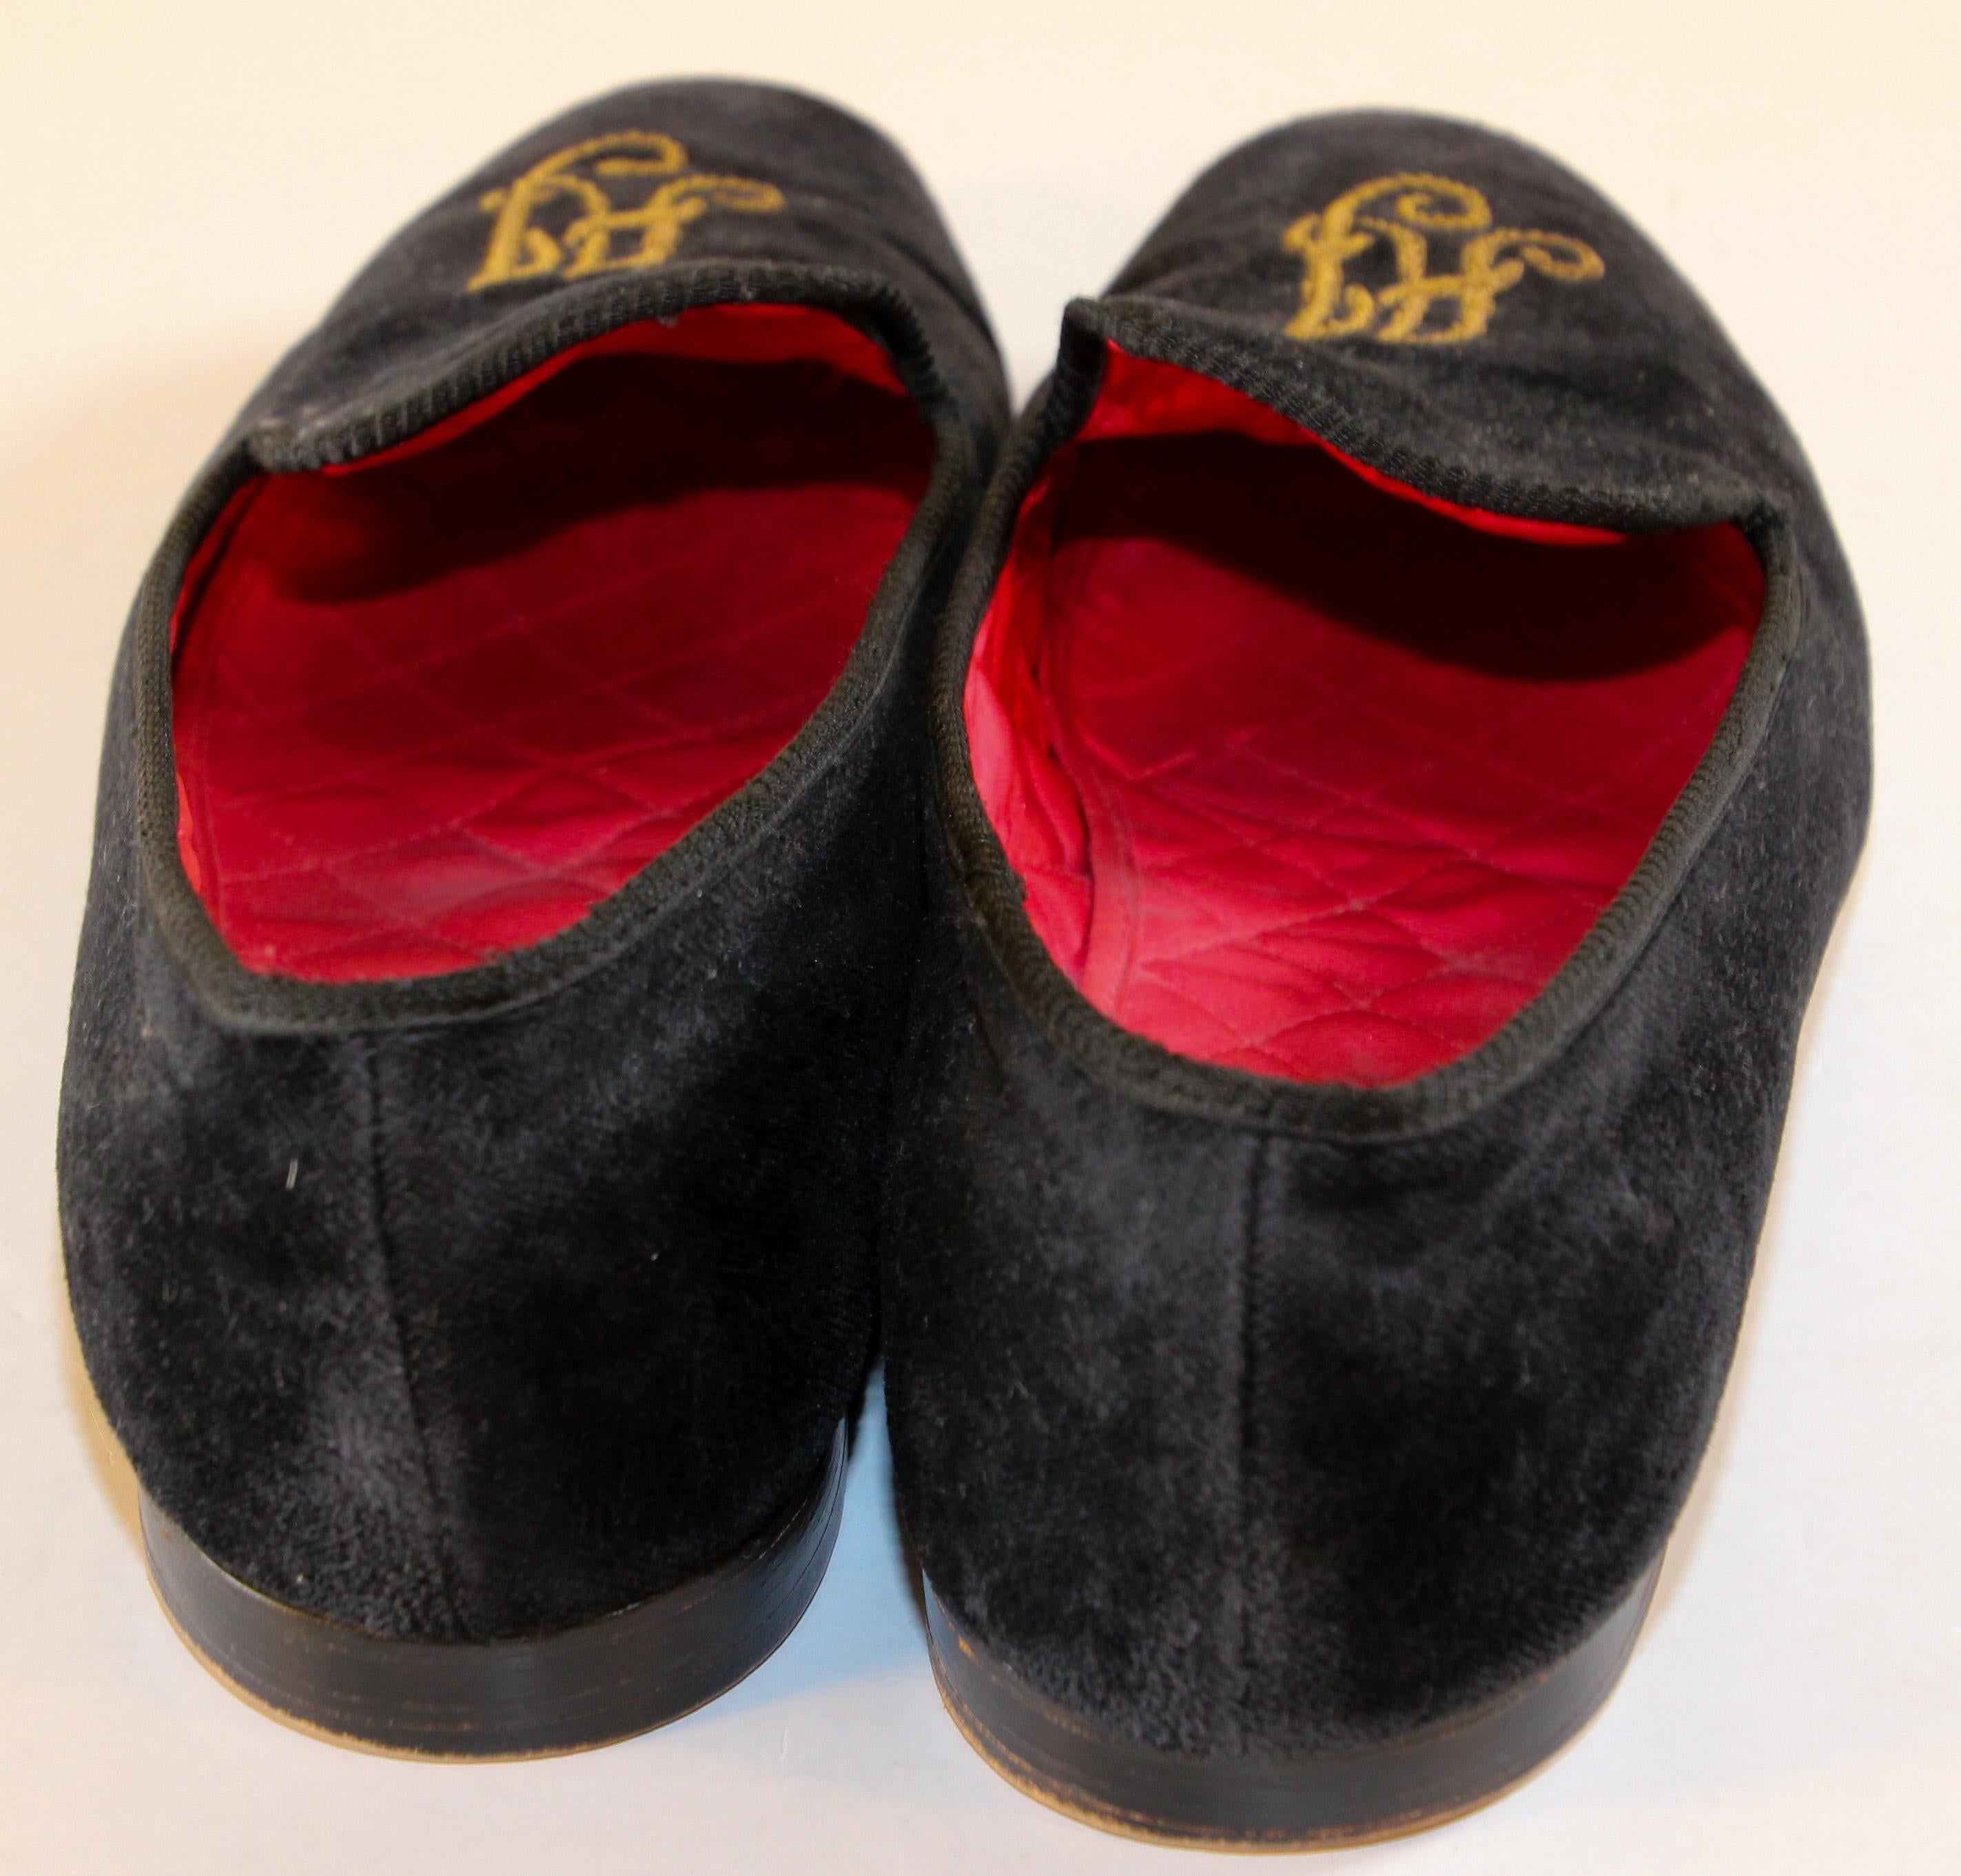 Victorian Handmade Men's Black Velvet Loafers with Gold Embroidery